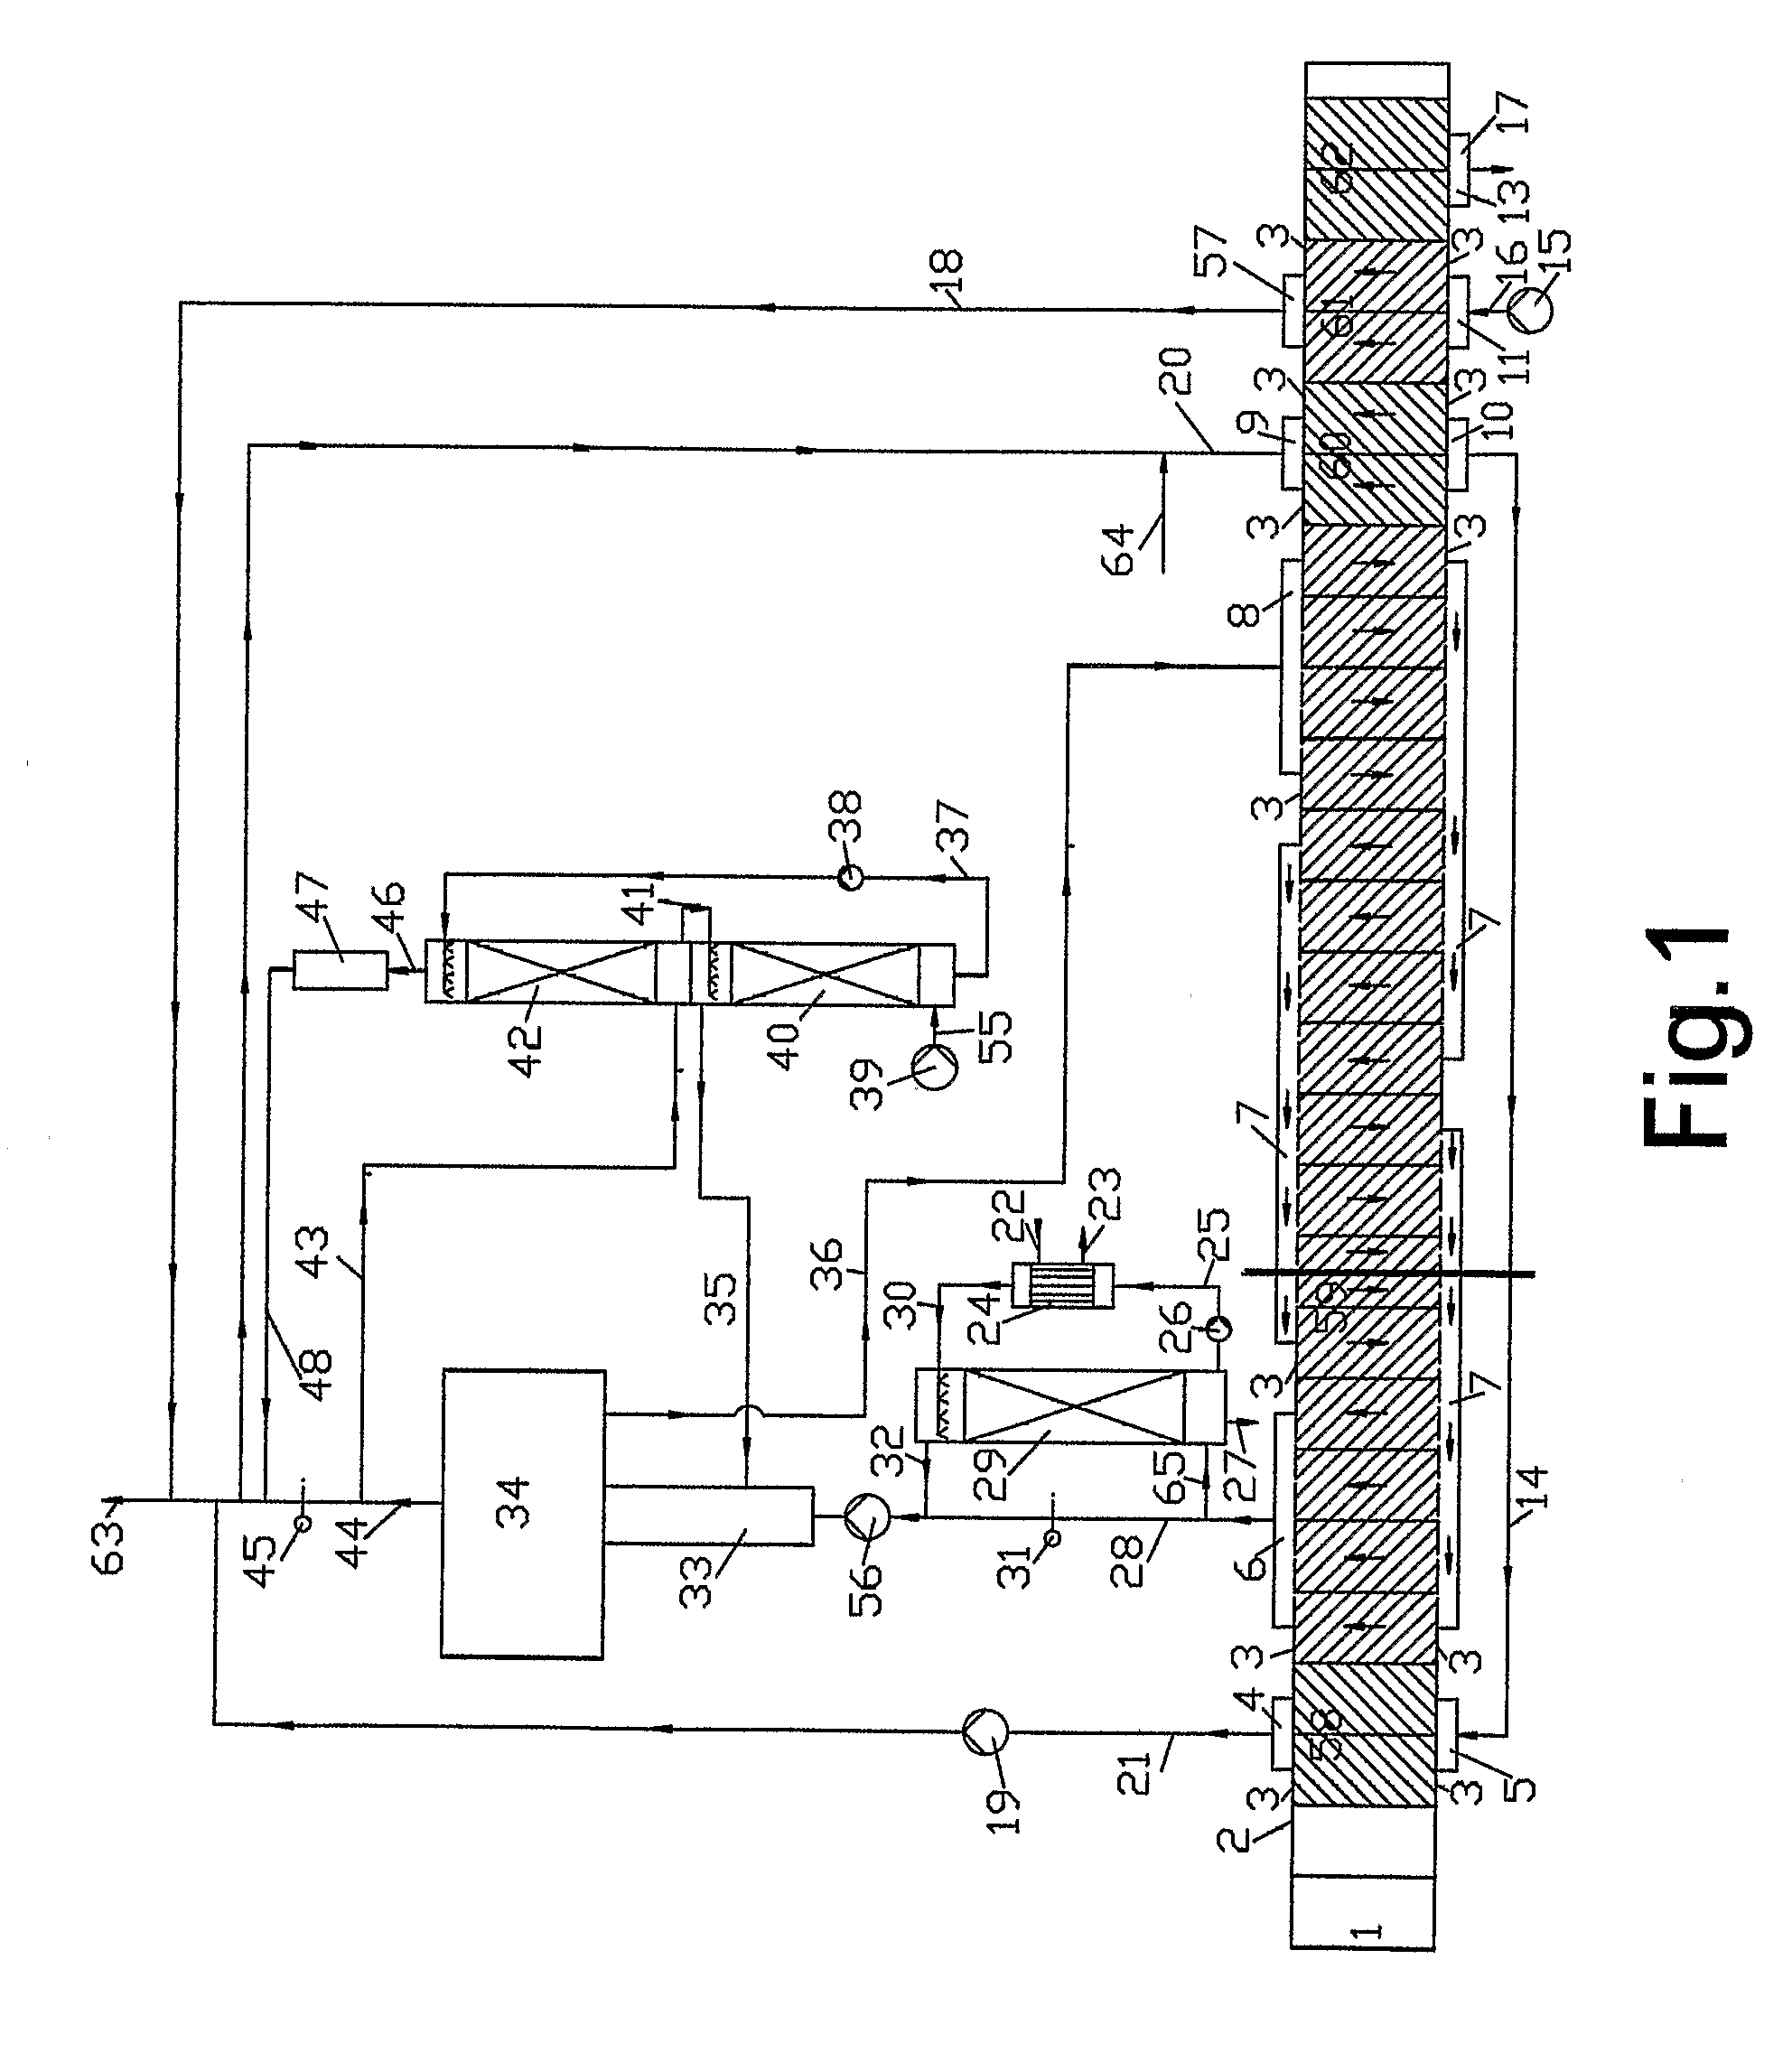 Method and Installation for Pyrolisis of Tires